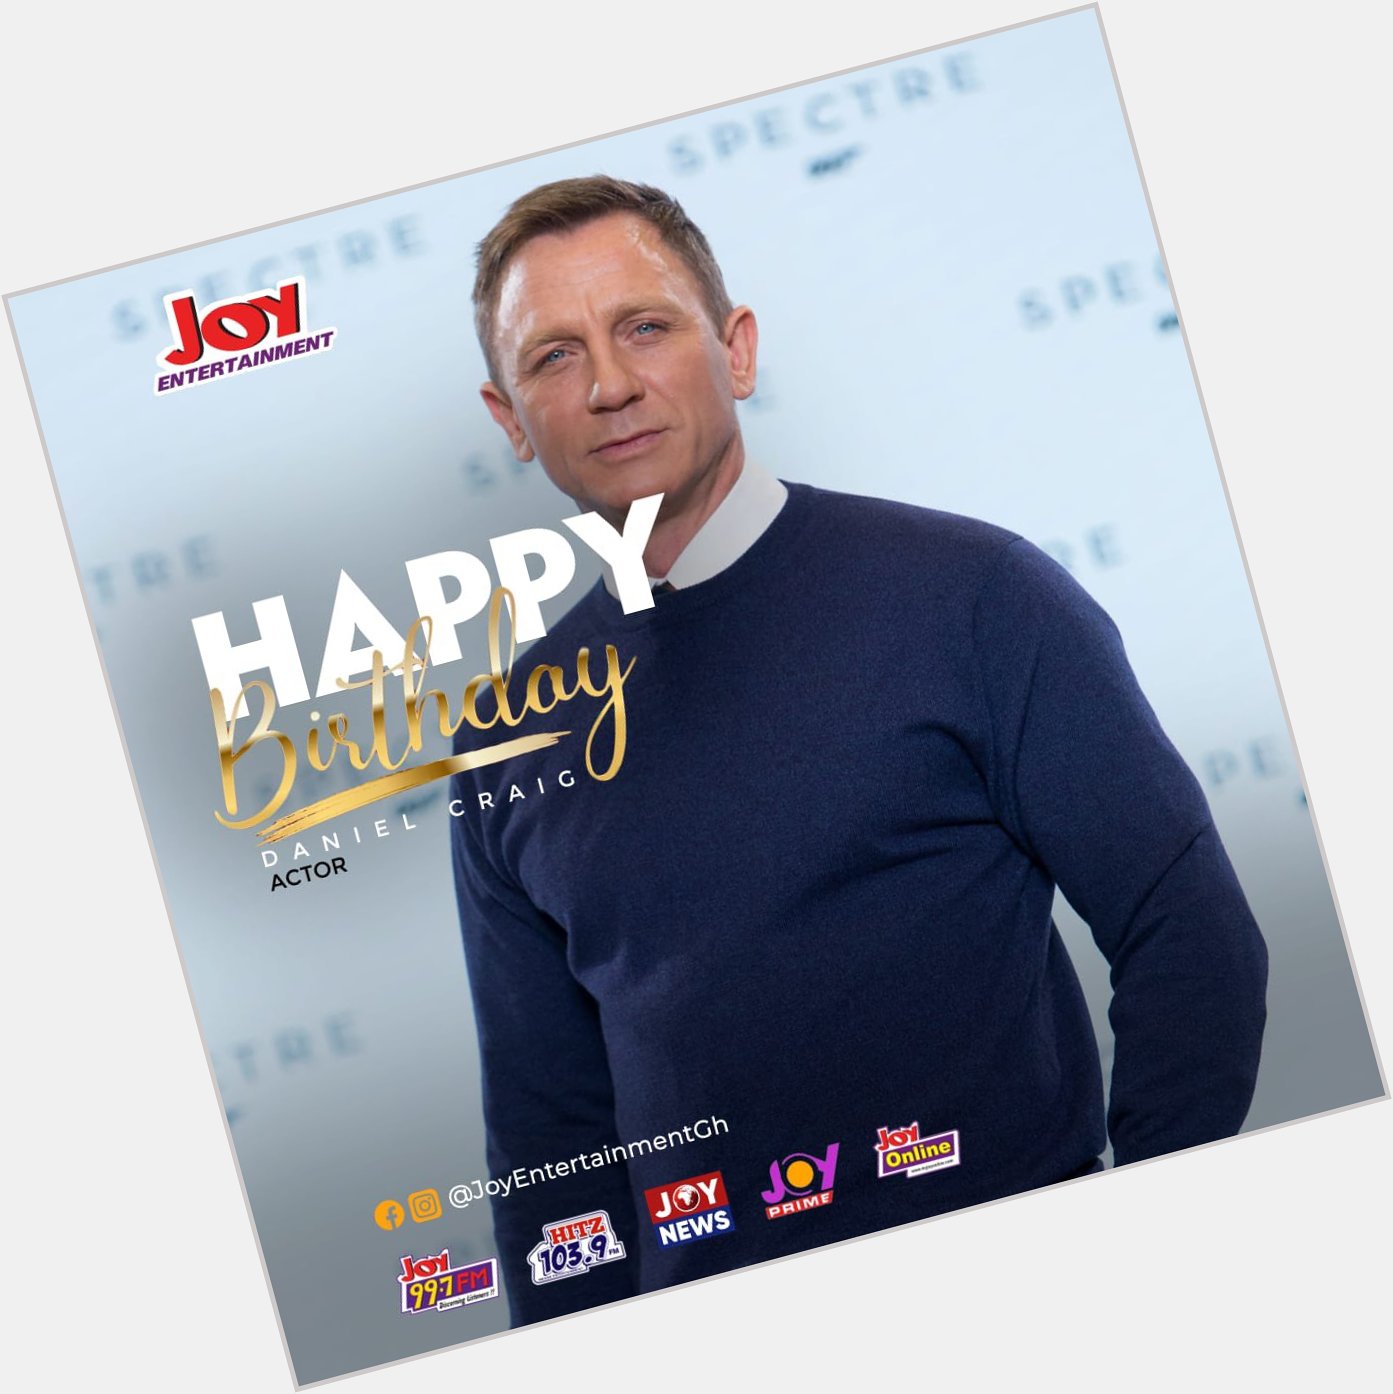 Happy 54th birthday to the actor who is the true embodiment of James Bond, Daniel Craig. 